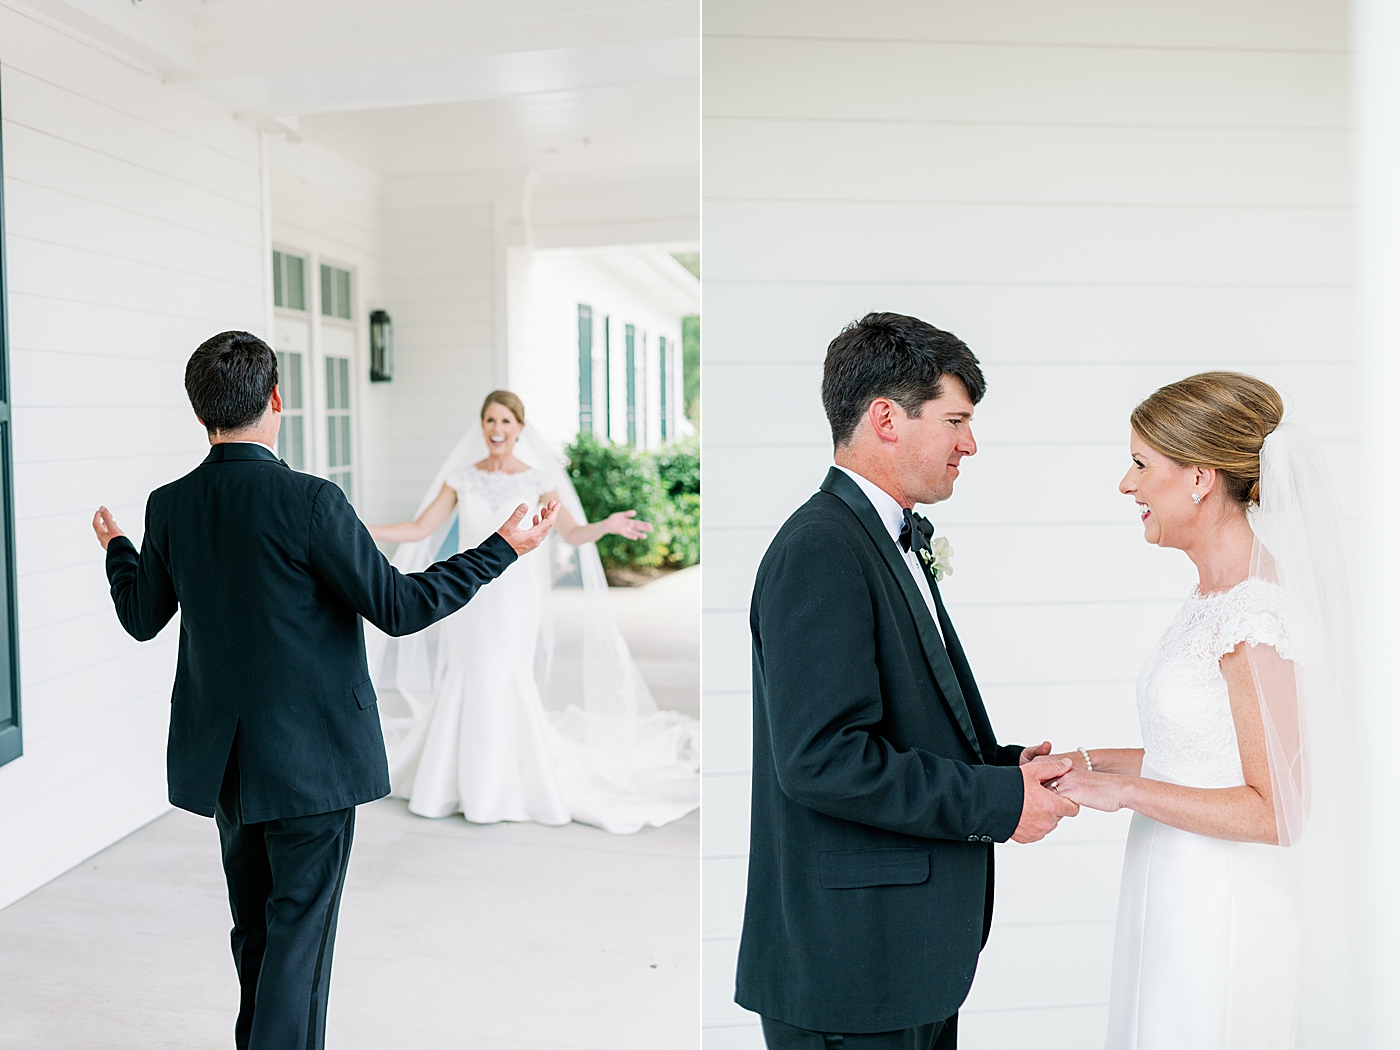 Bride and groom first look during their Simple Southern Country Club Wedding | Image by Annie Laura Photo